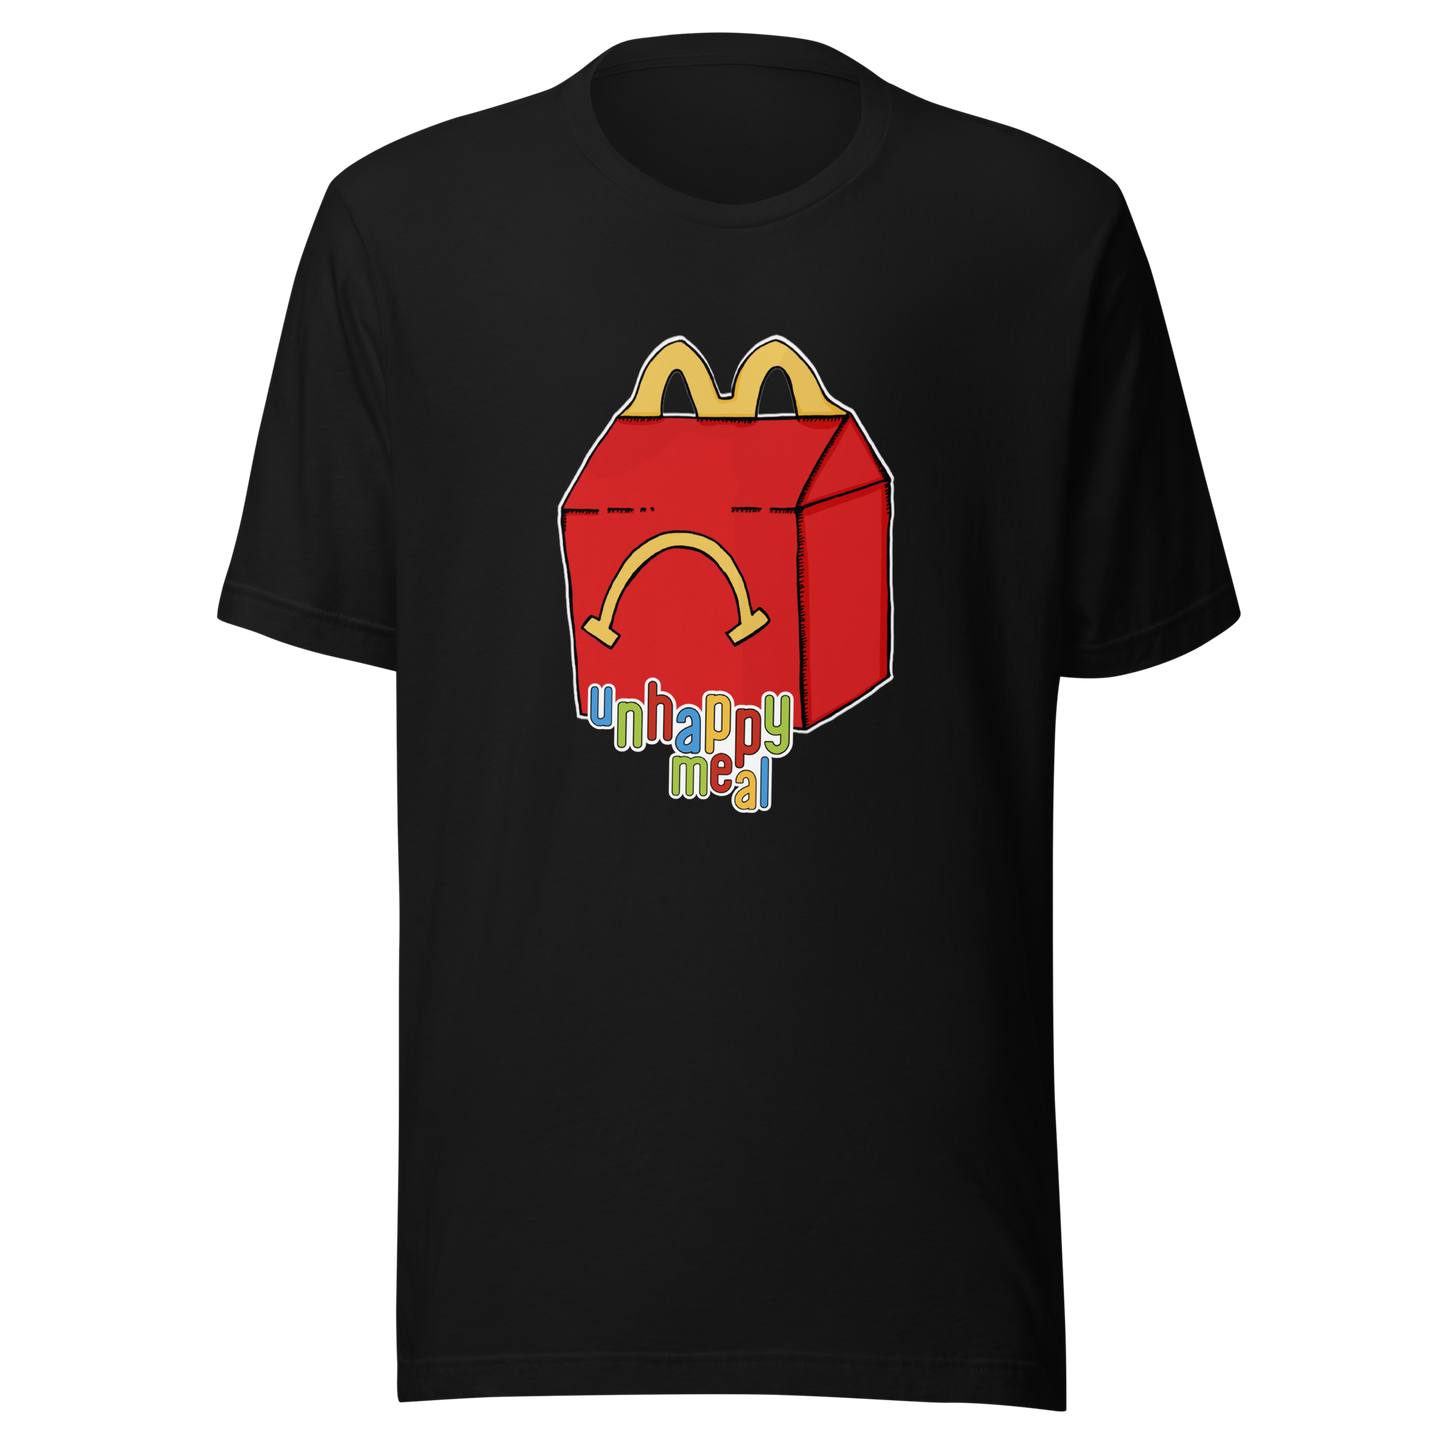 unhappy meal t-shirt in black - gaslit apparel